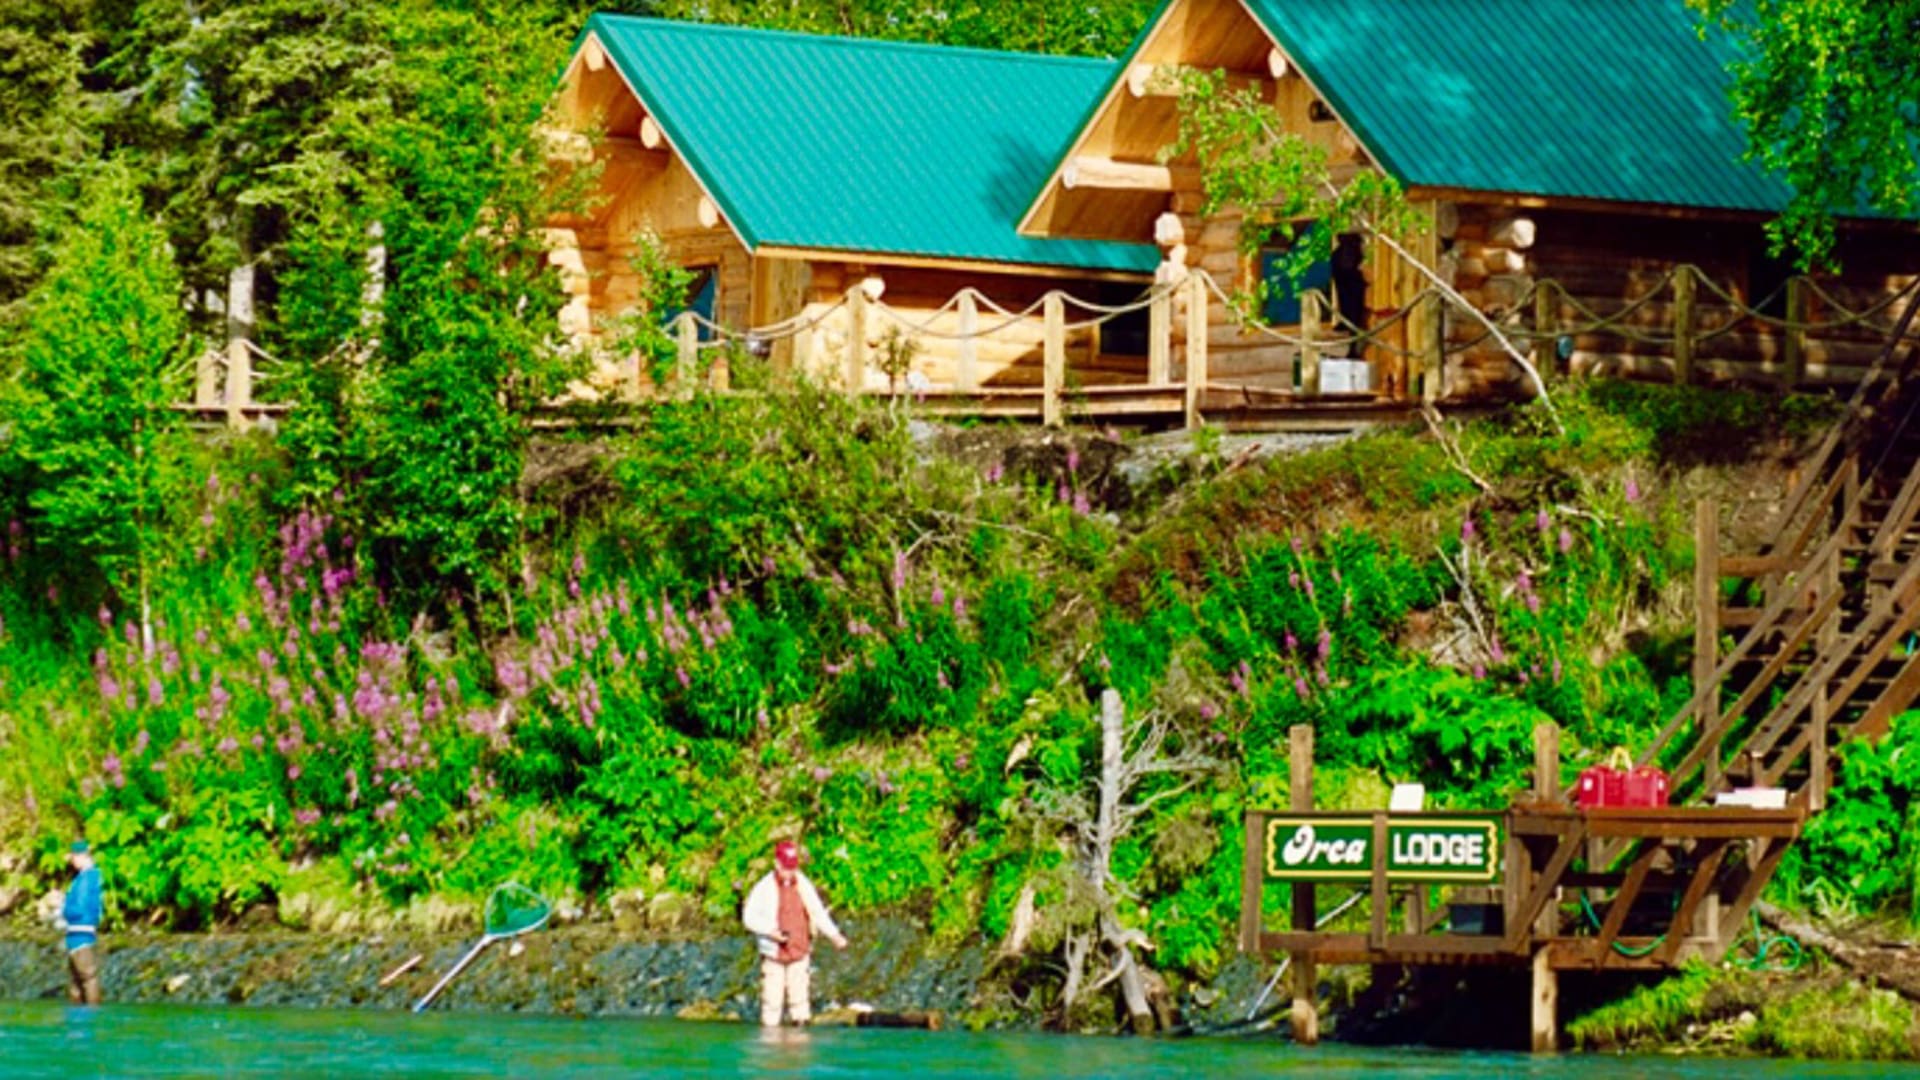 Welcome to Orca Lodge!